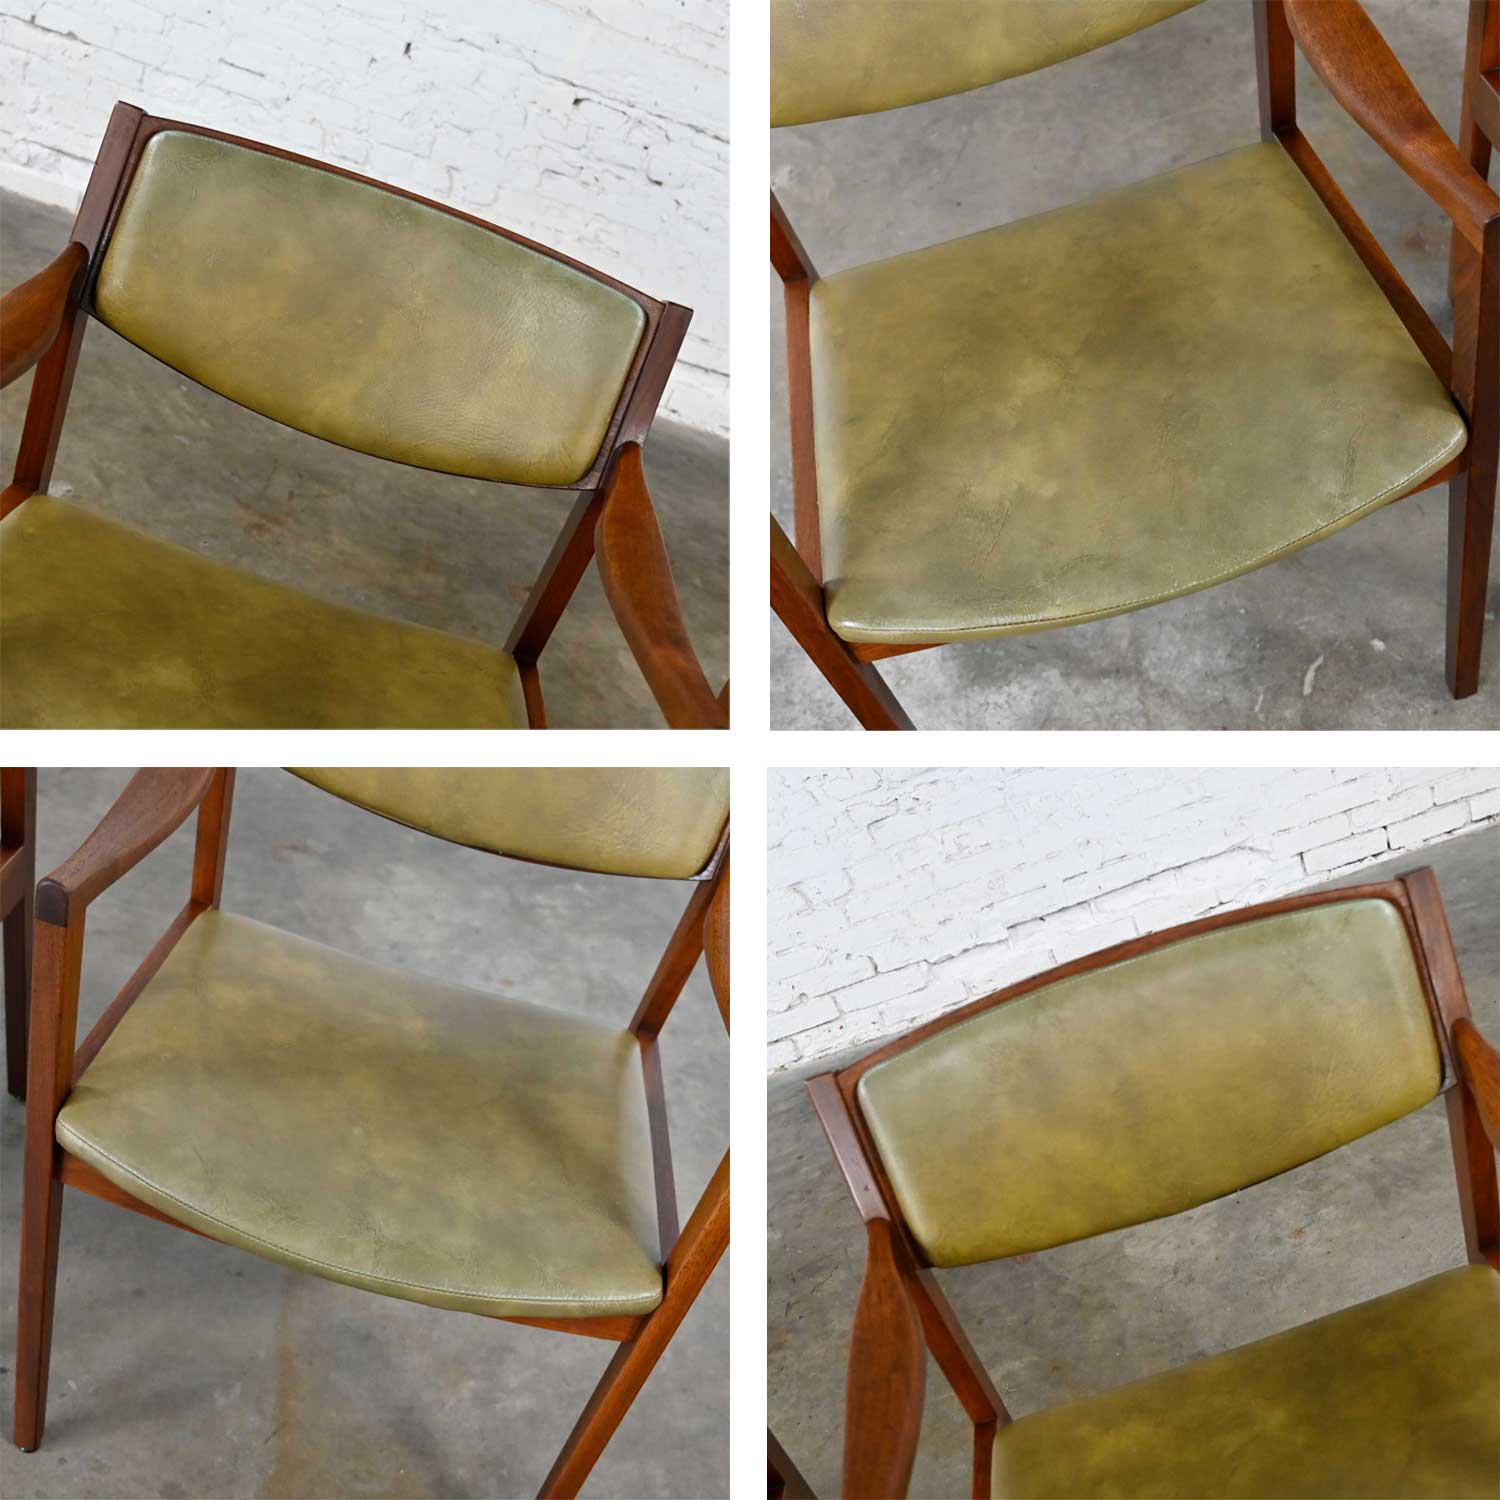 Mid-Century Modern Solid Walnut & Olive Green Faux Leather Chairs by Gunlocke a Pair